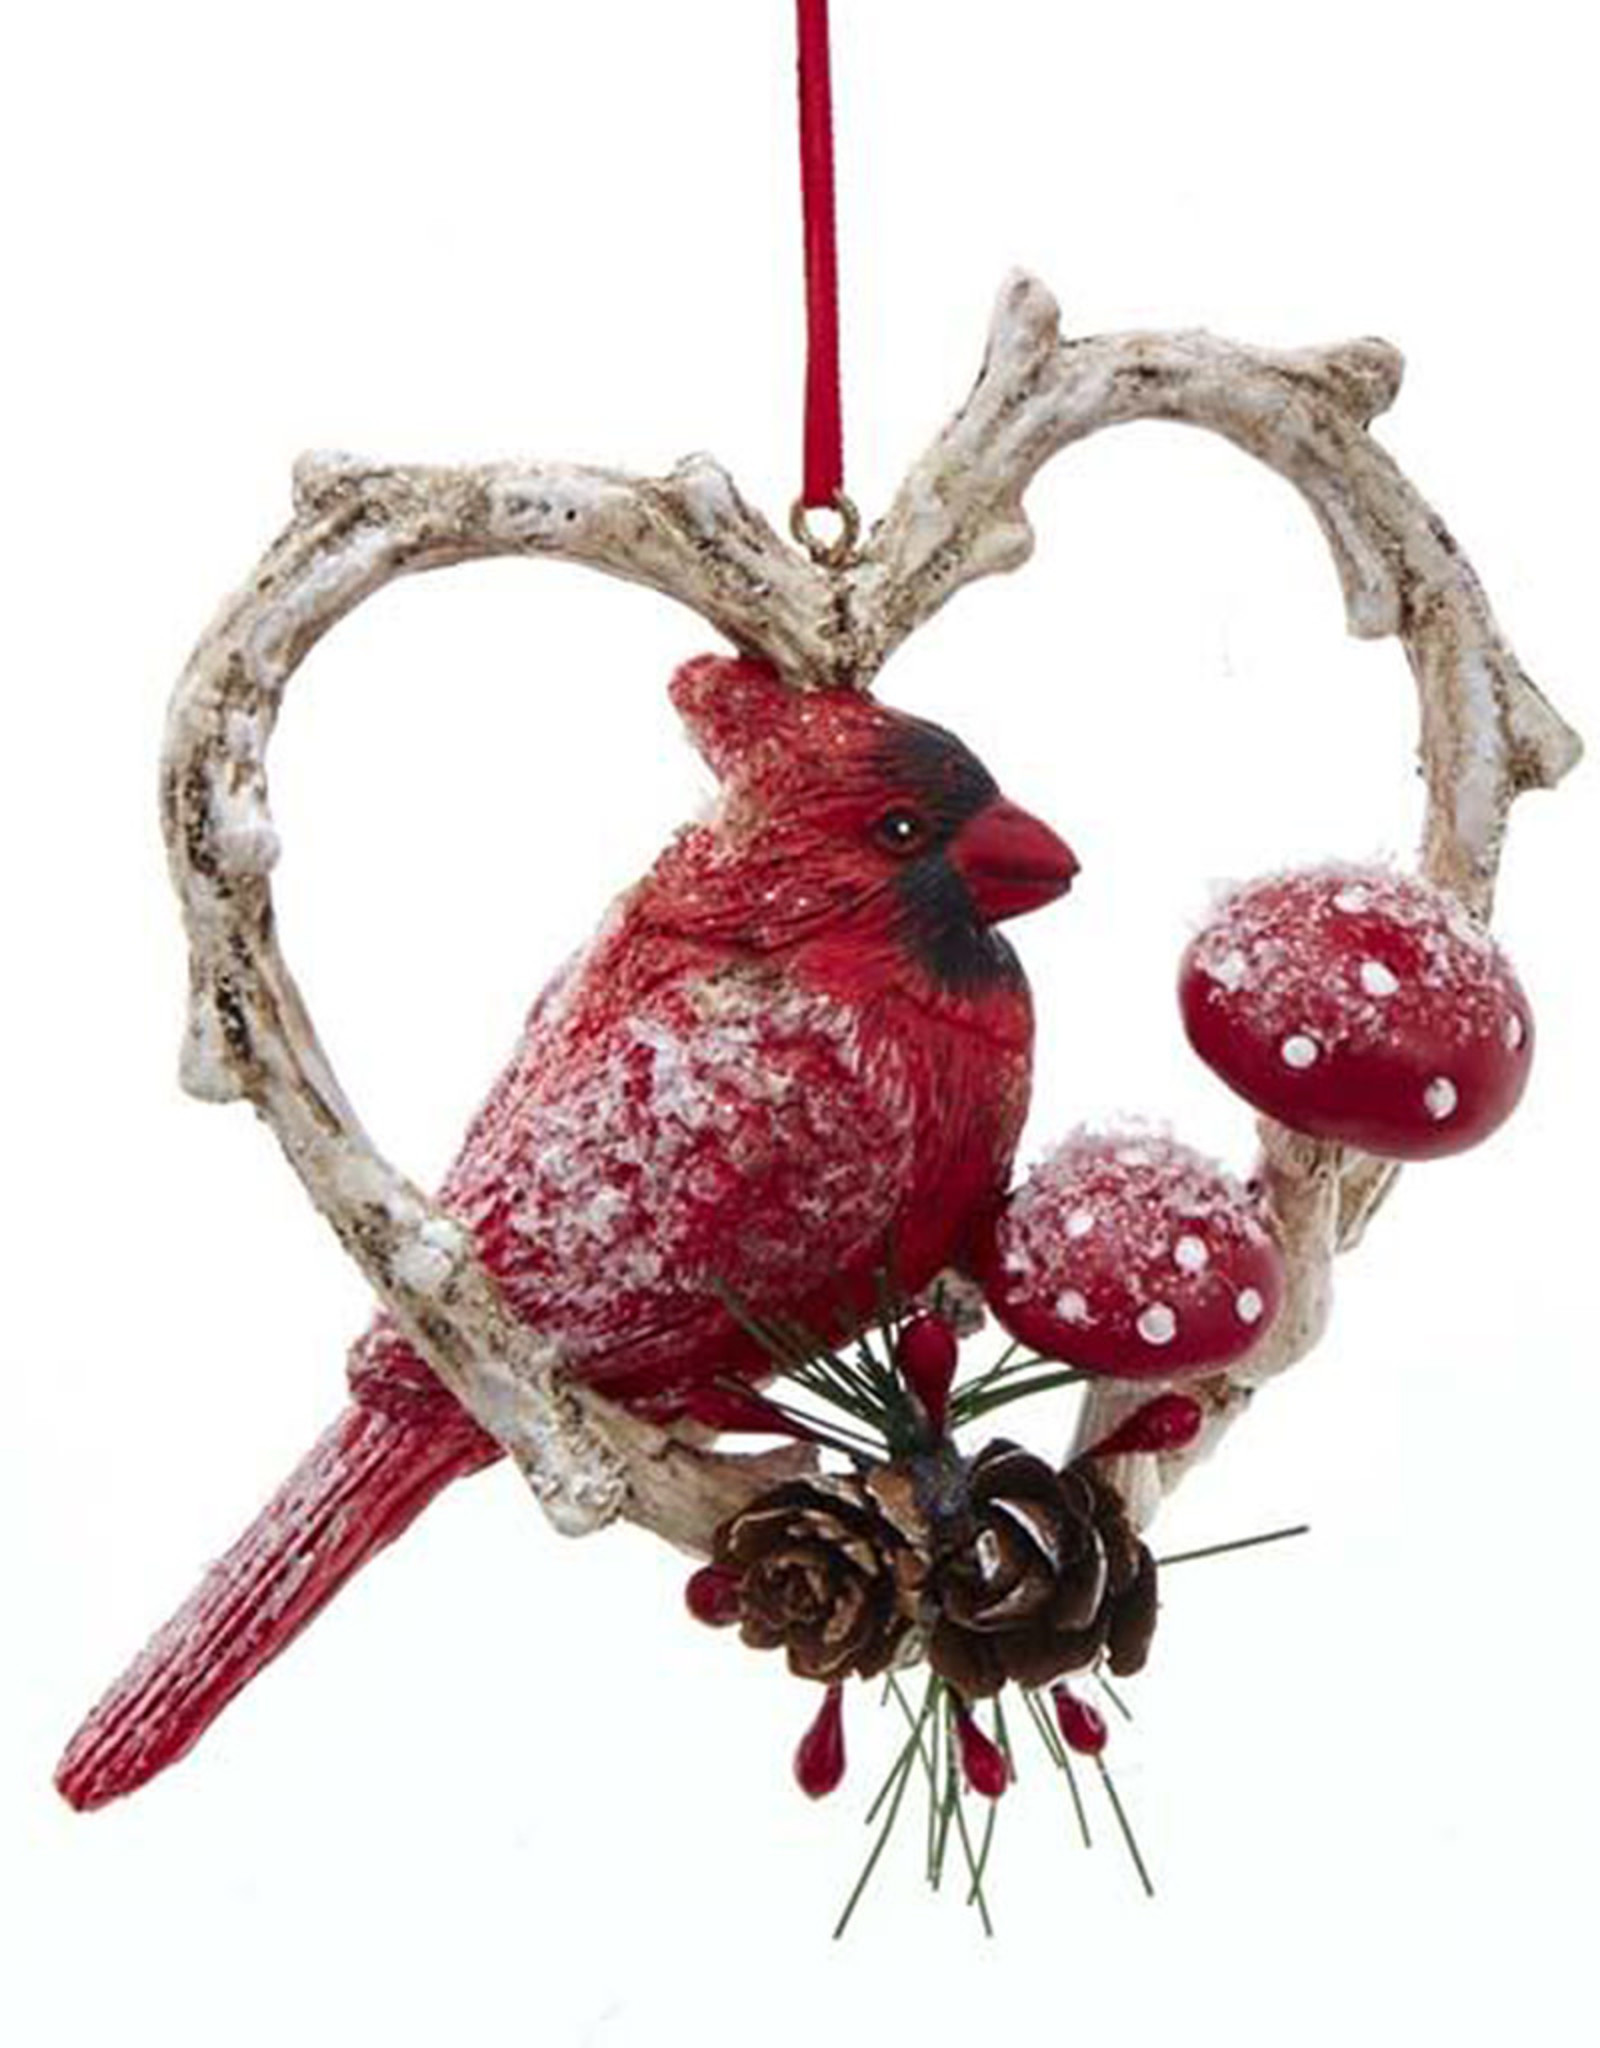 Cardinal Sitting in A Nest - Ornament